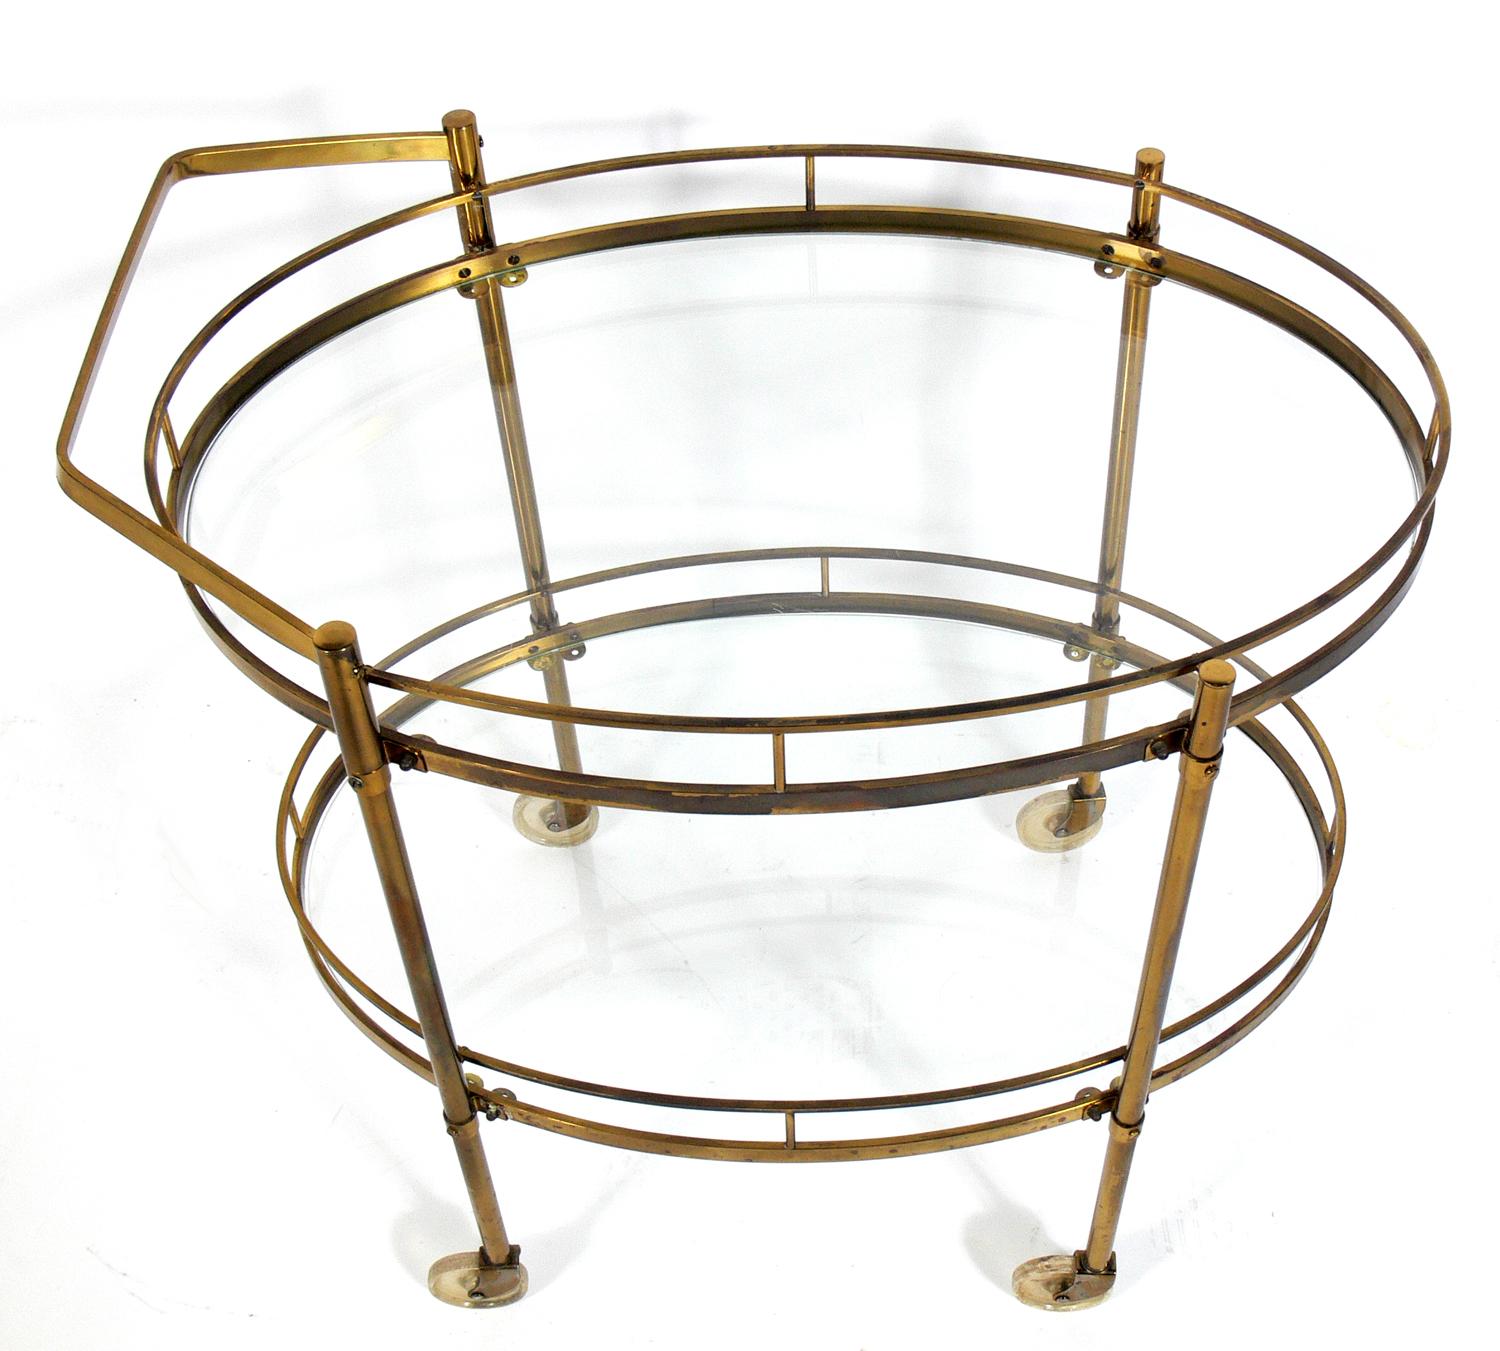 Midcentury brass bar cart, probably Italian, circa 1960s. Two large oval glass shelves provide lots of storage. Can be used as a bar cart, serving cart, or as movable storage in an office. Retains warm original patina.